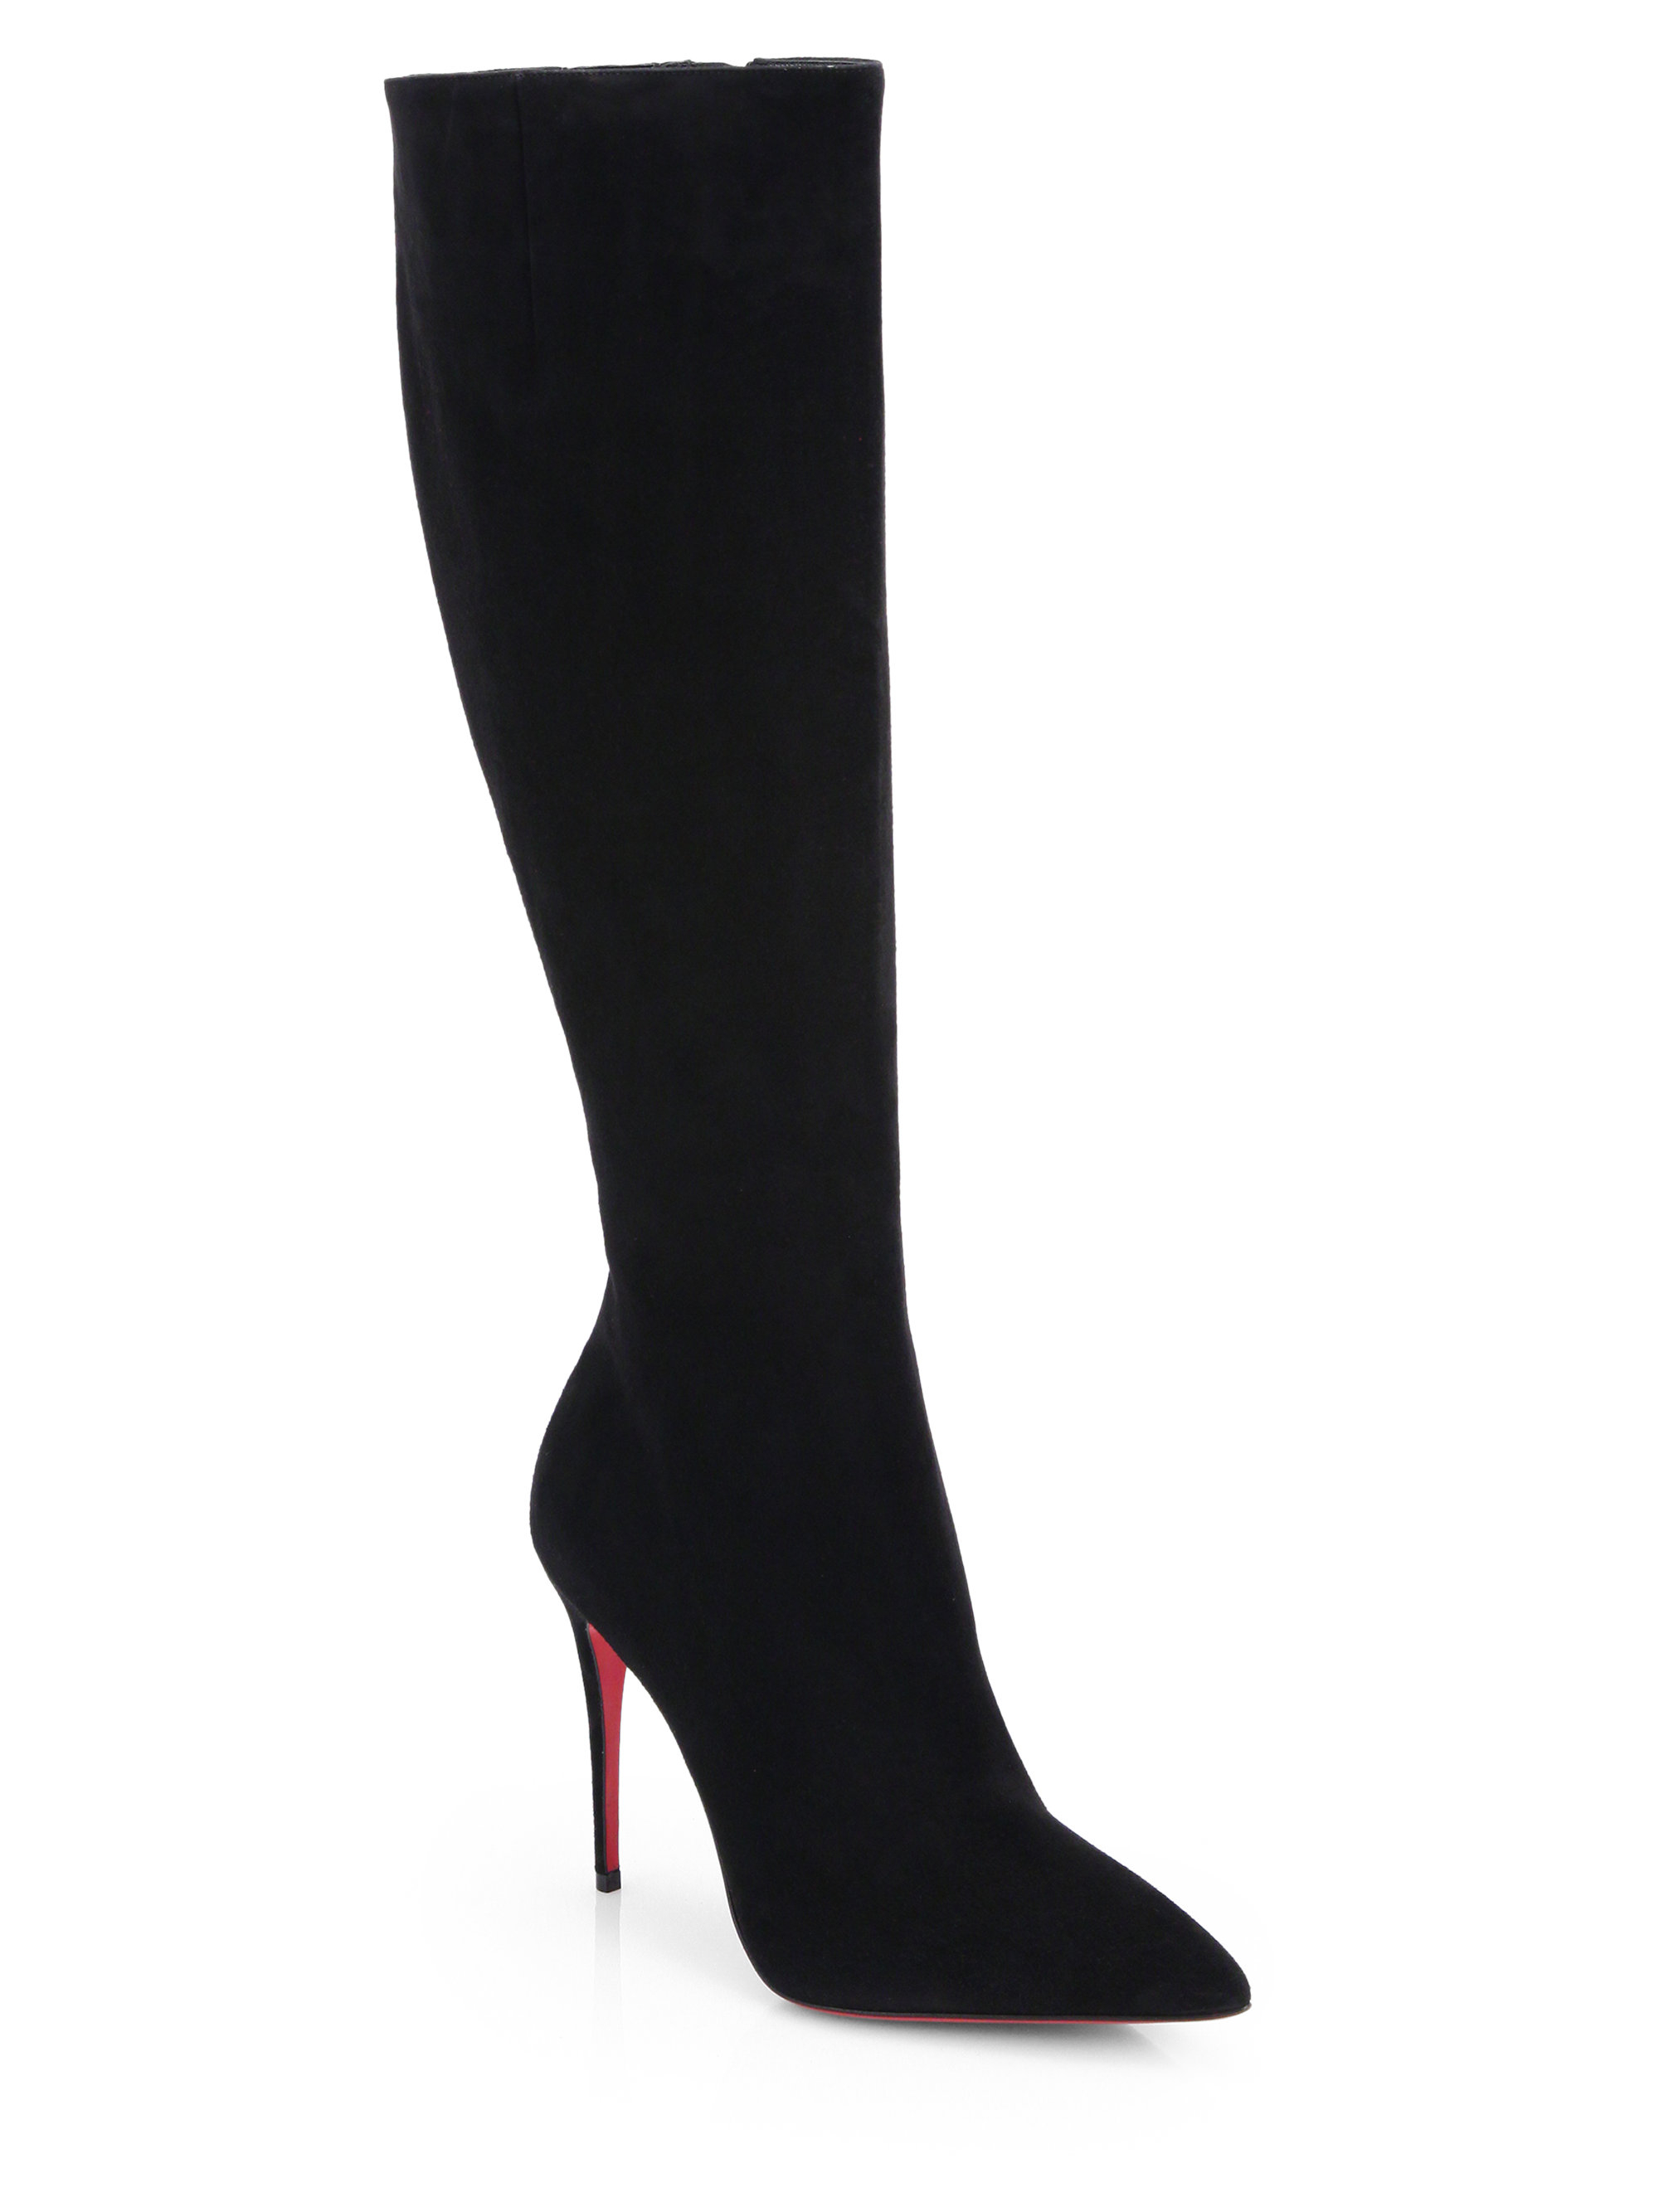 Christian louboutin Leather Lace-up Booties in Black | Lyst